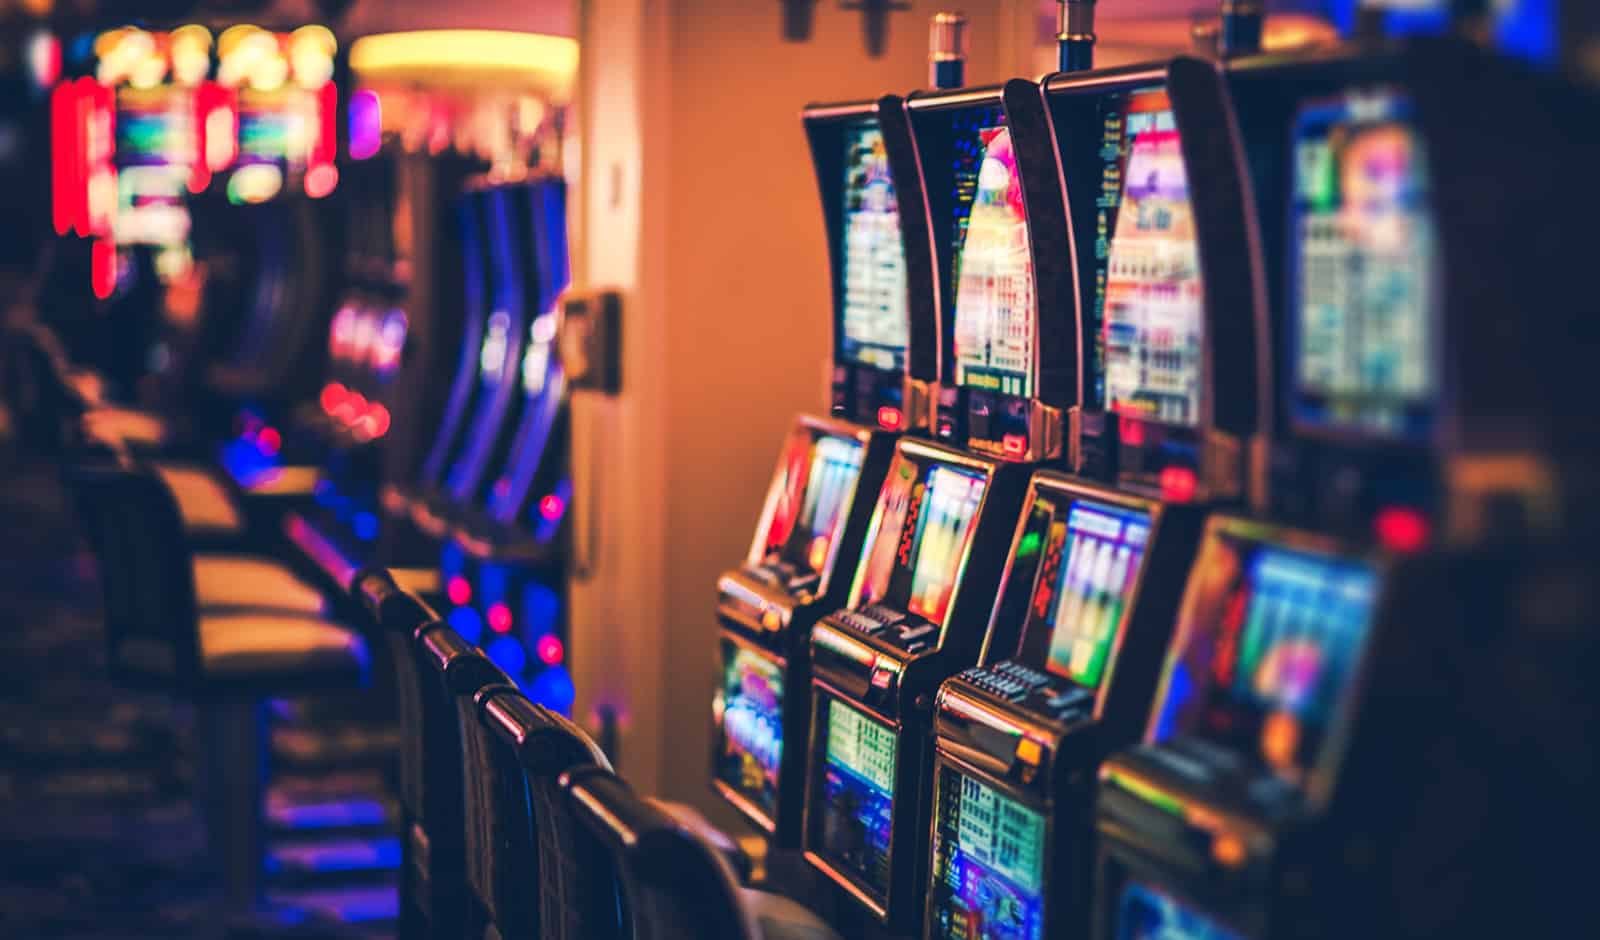 best online slot games to play